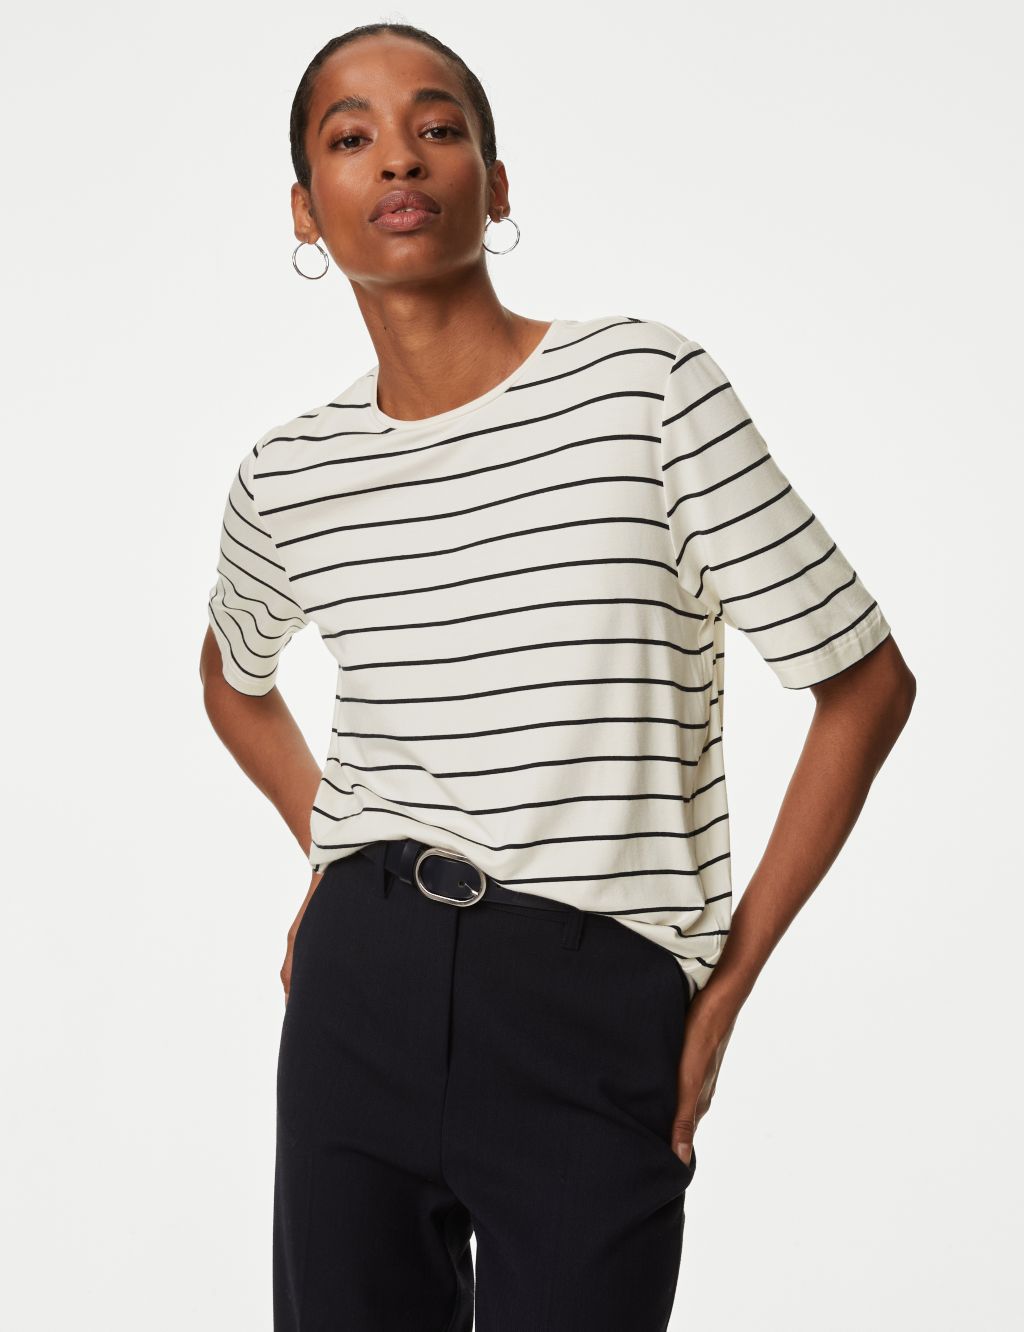 Jersey Striped Round Neck Relaxed T-Shirt | Autograph | M&S